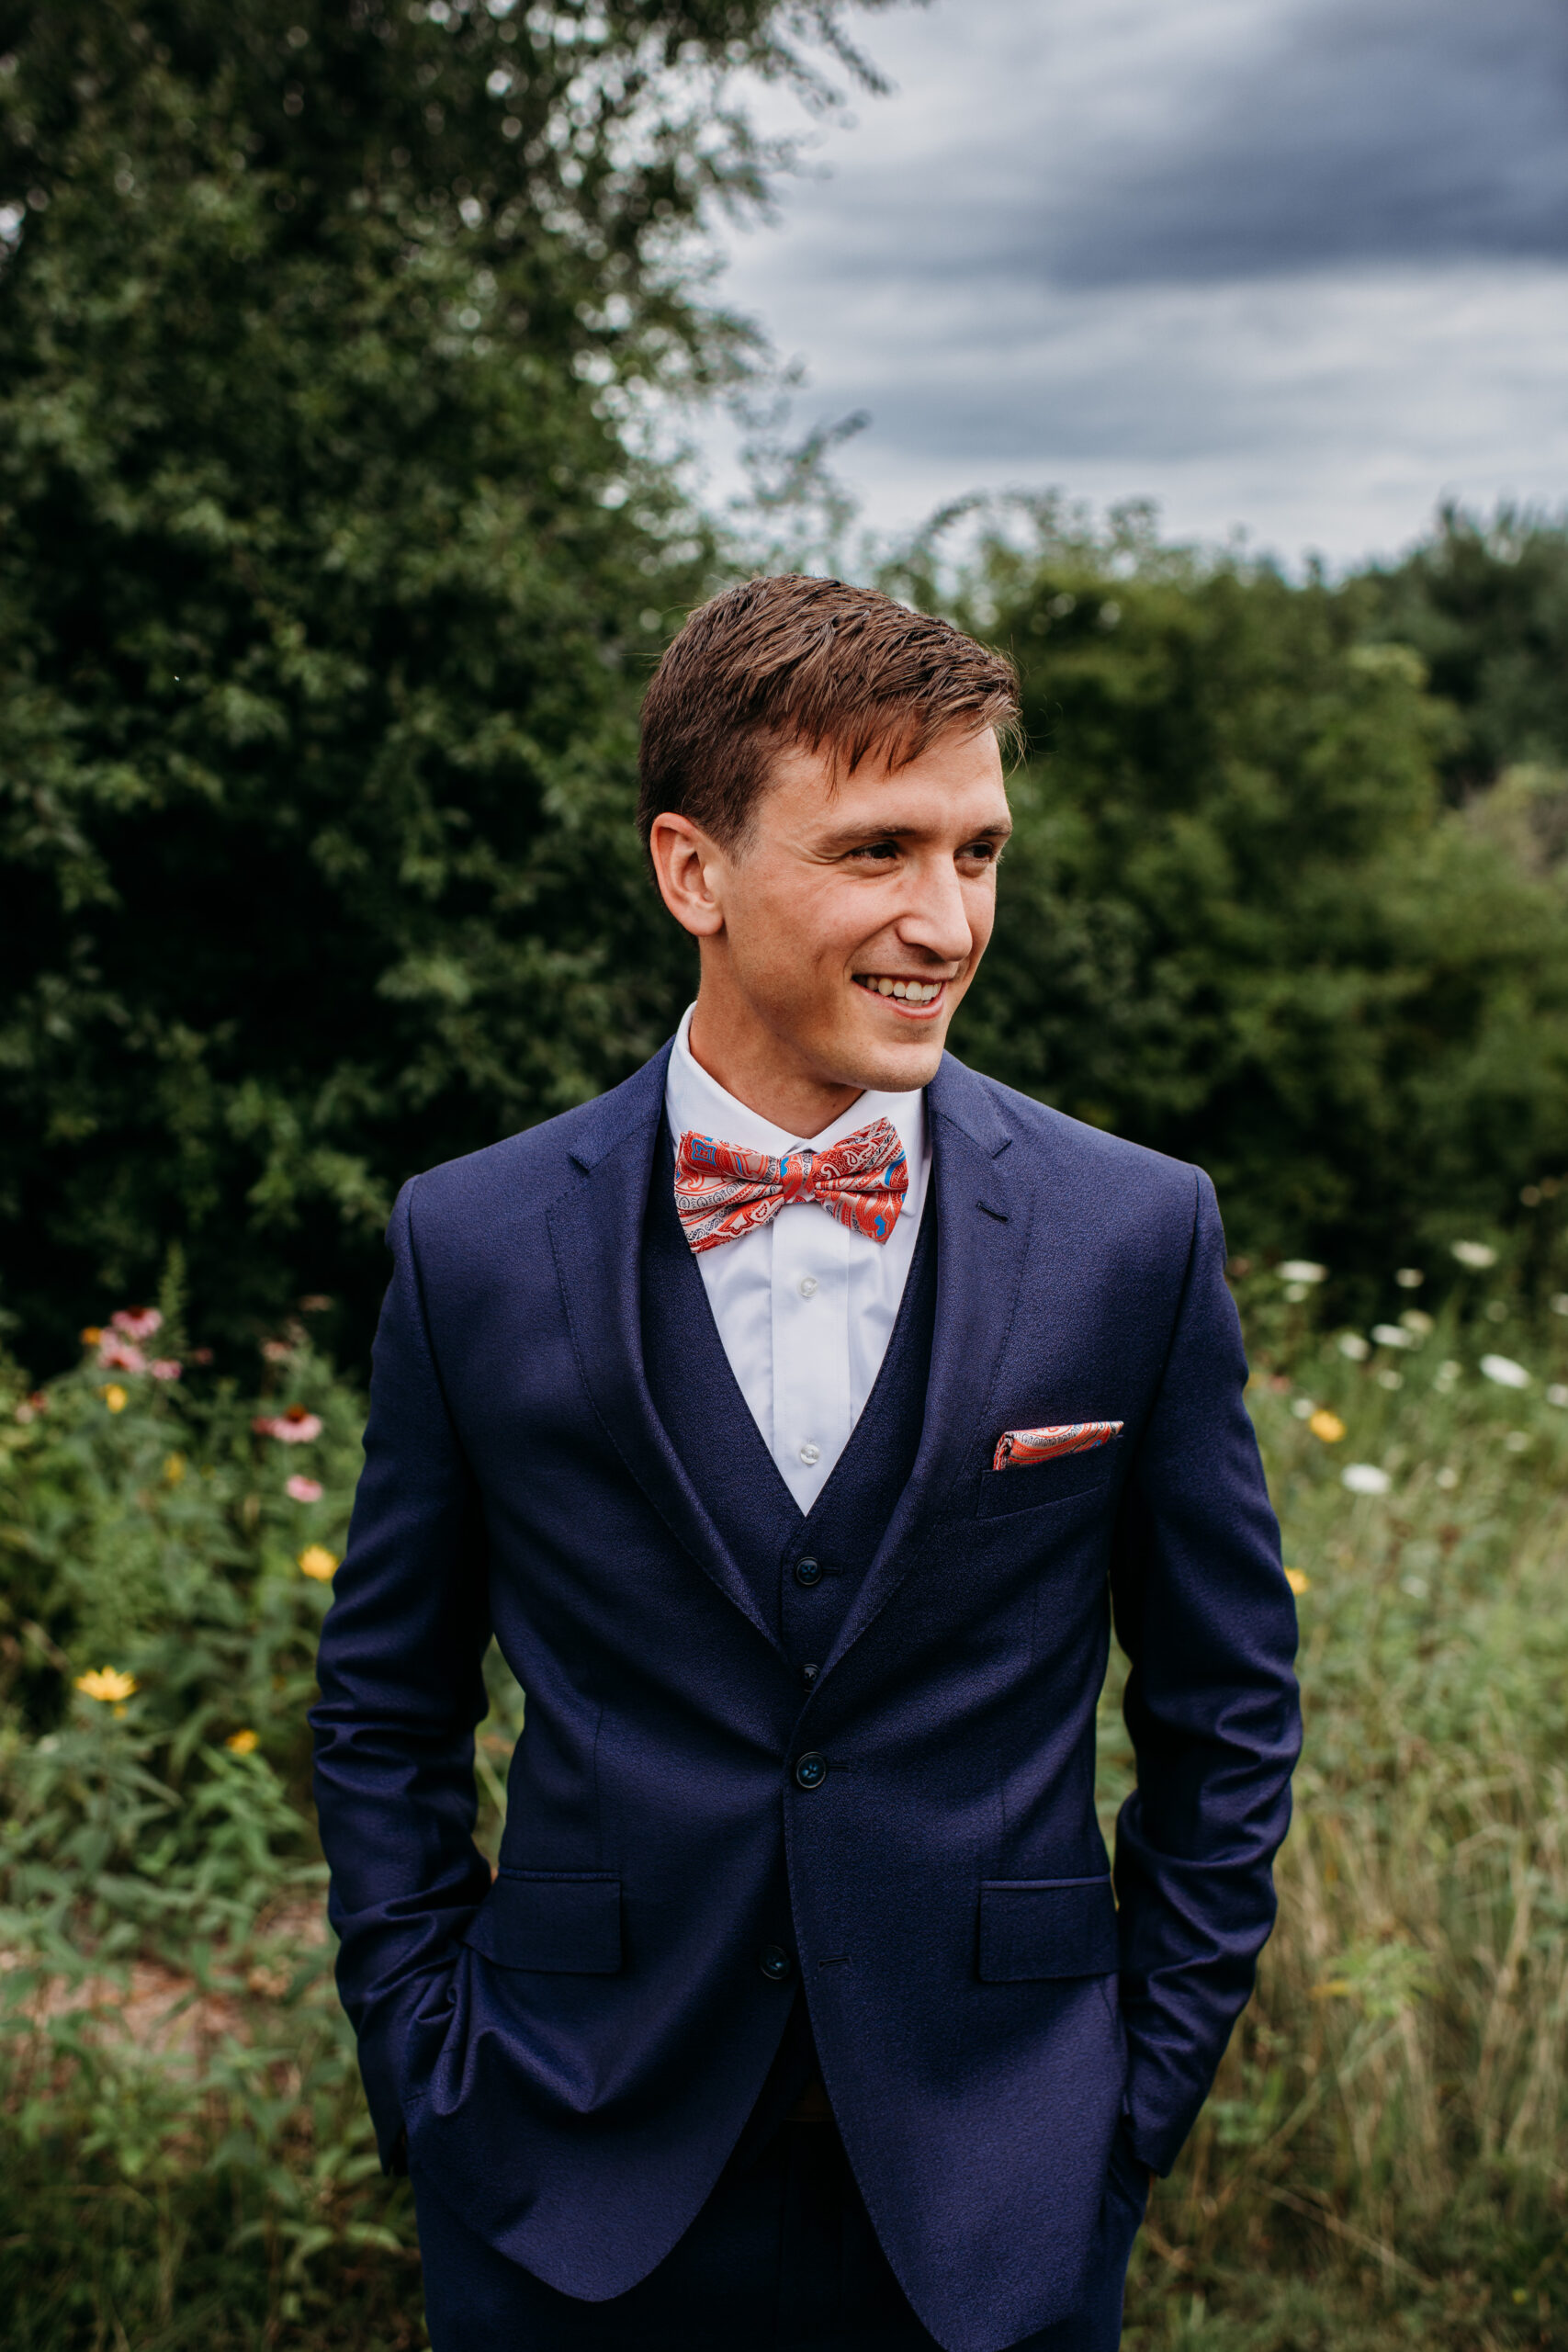 Groom in navy suit and salmon bowtie looking off into the distance in a field